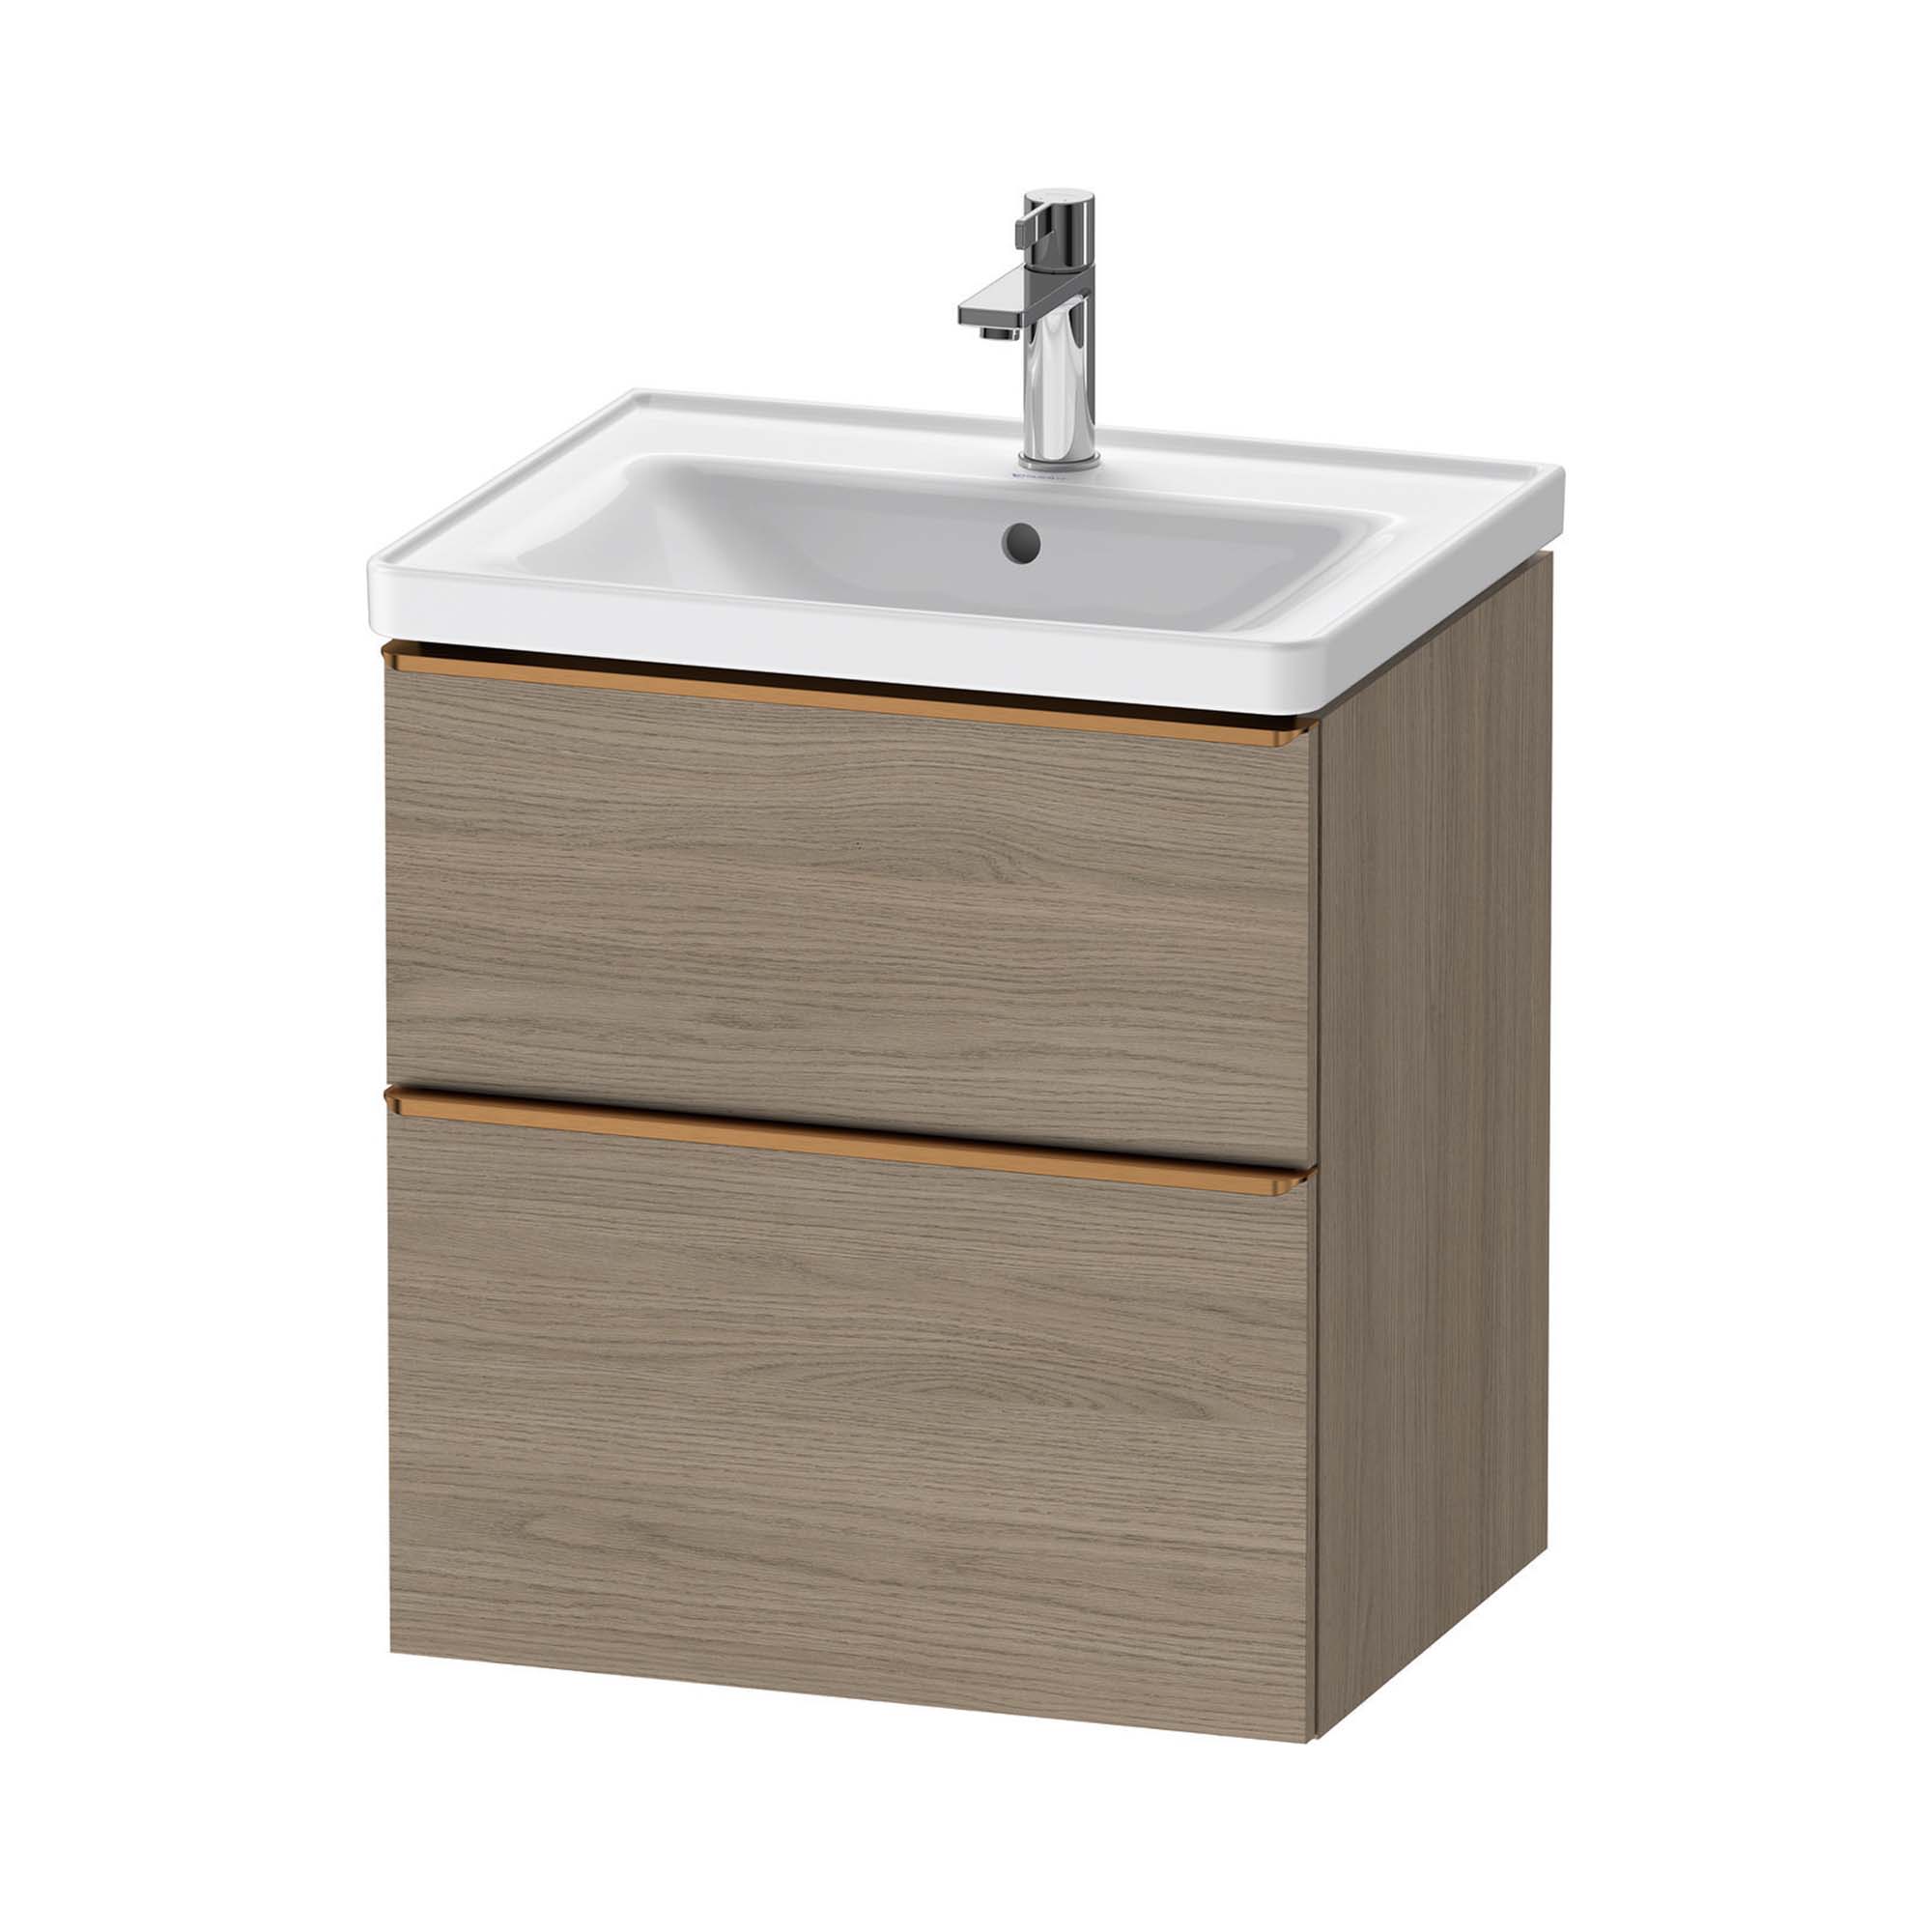 duravit d-neo 600 wall mounted vanity unit with d-neo basin oak terra brushed bronze handles